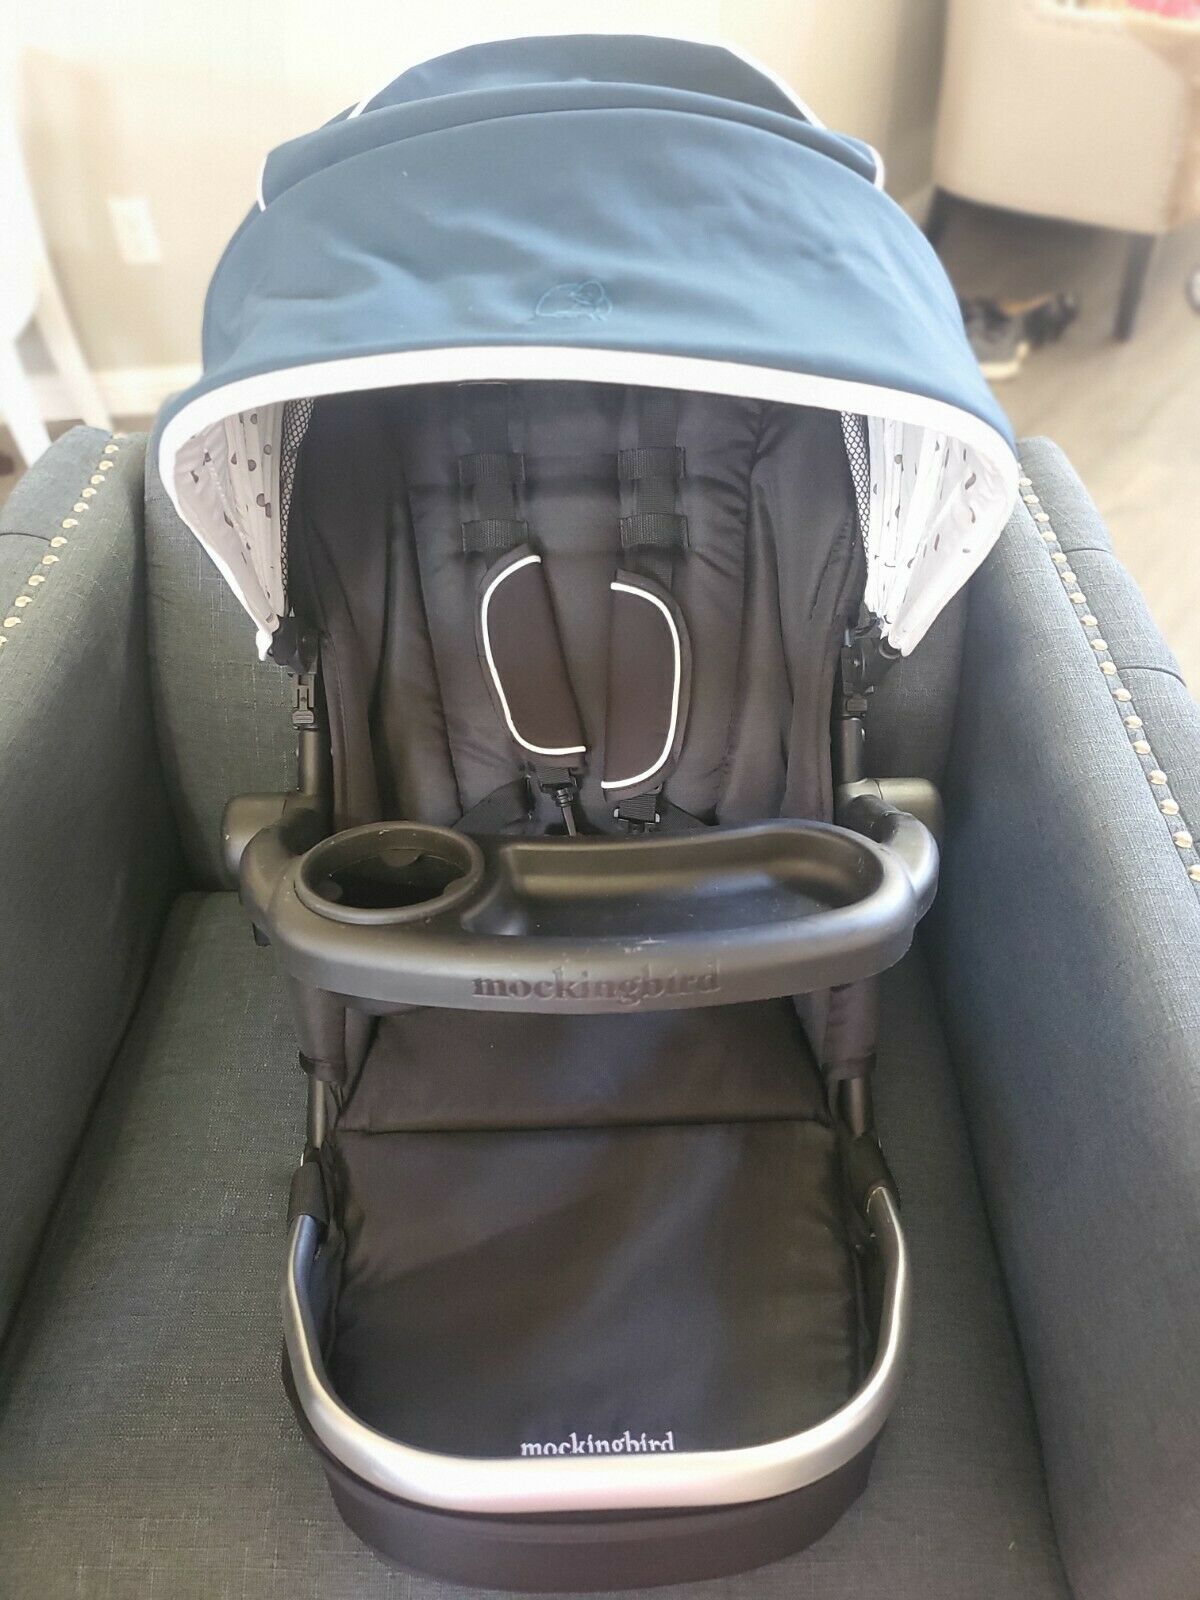 Mockingbird Stroller's Replacement Seat in Sea Color HOT DEAL AT WALMART!